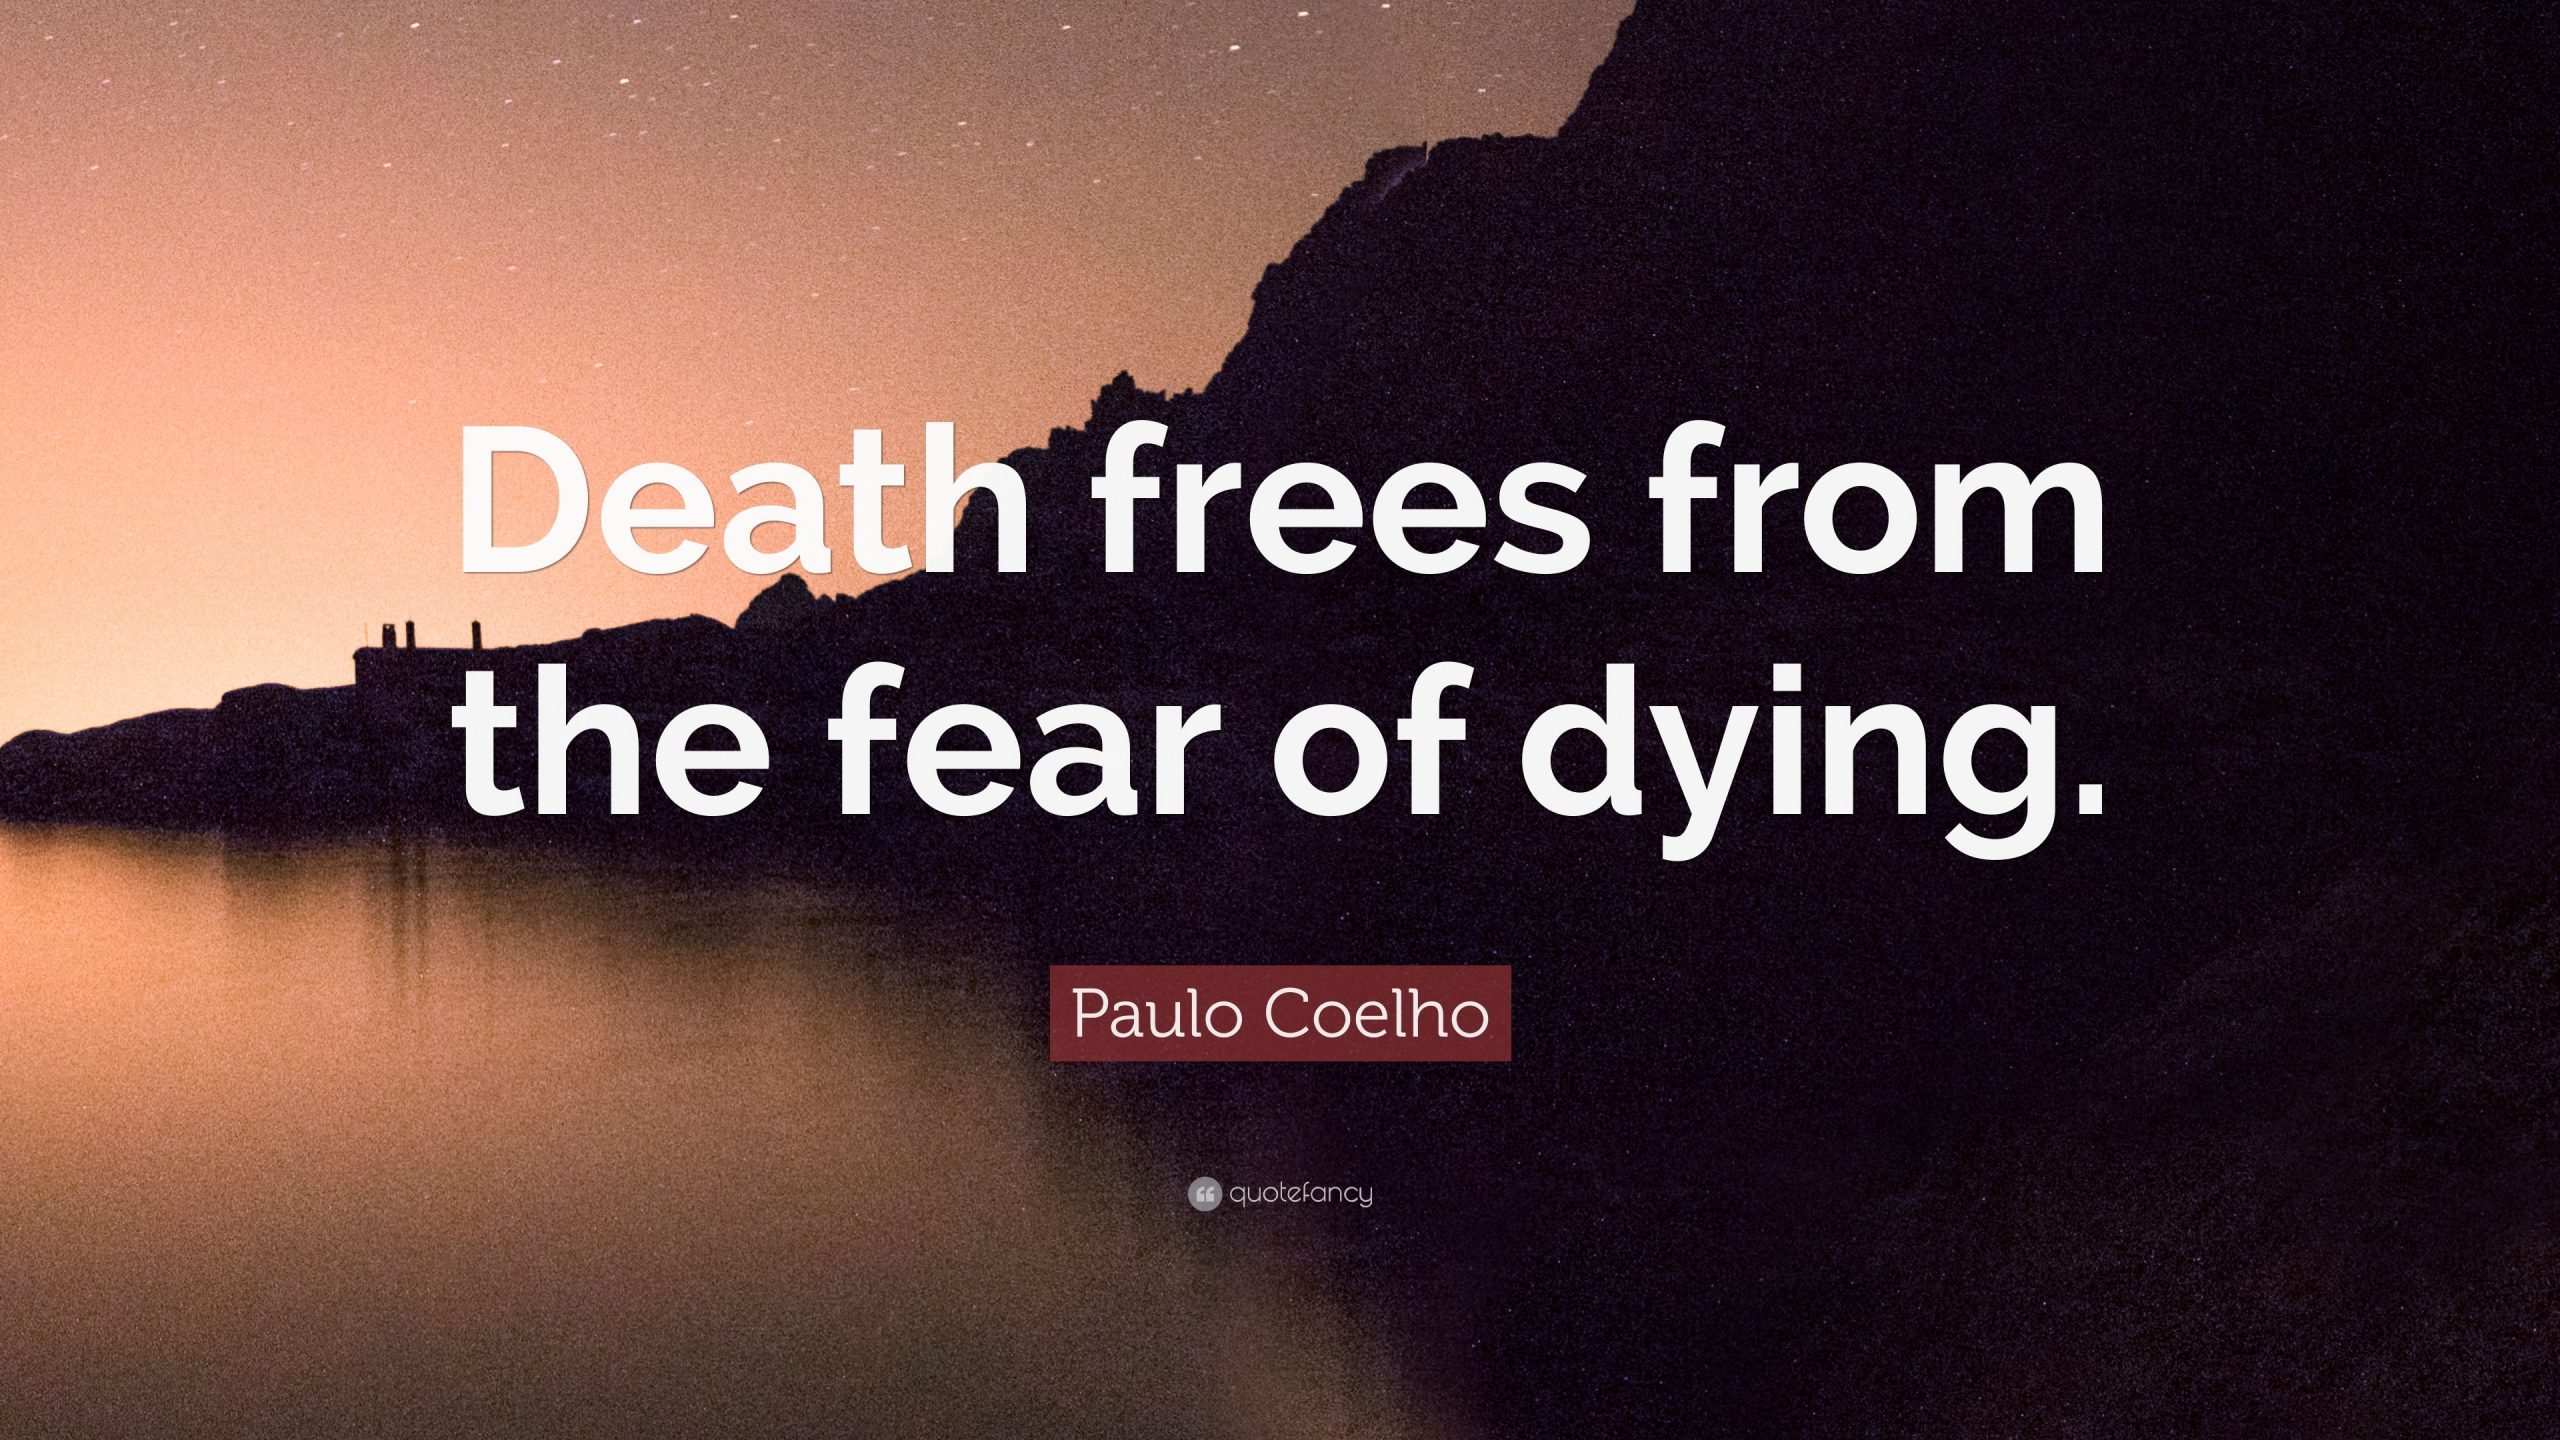 Paulo Coelho Quote: “Death frees from the fear of dying ...